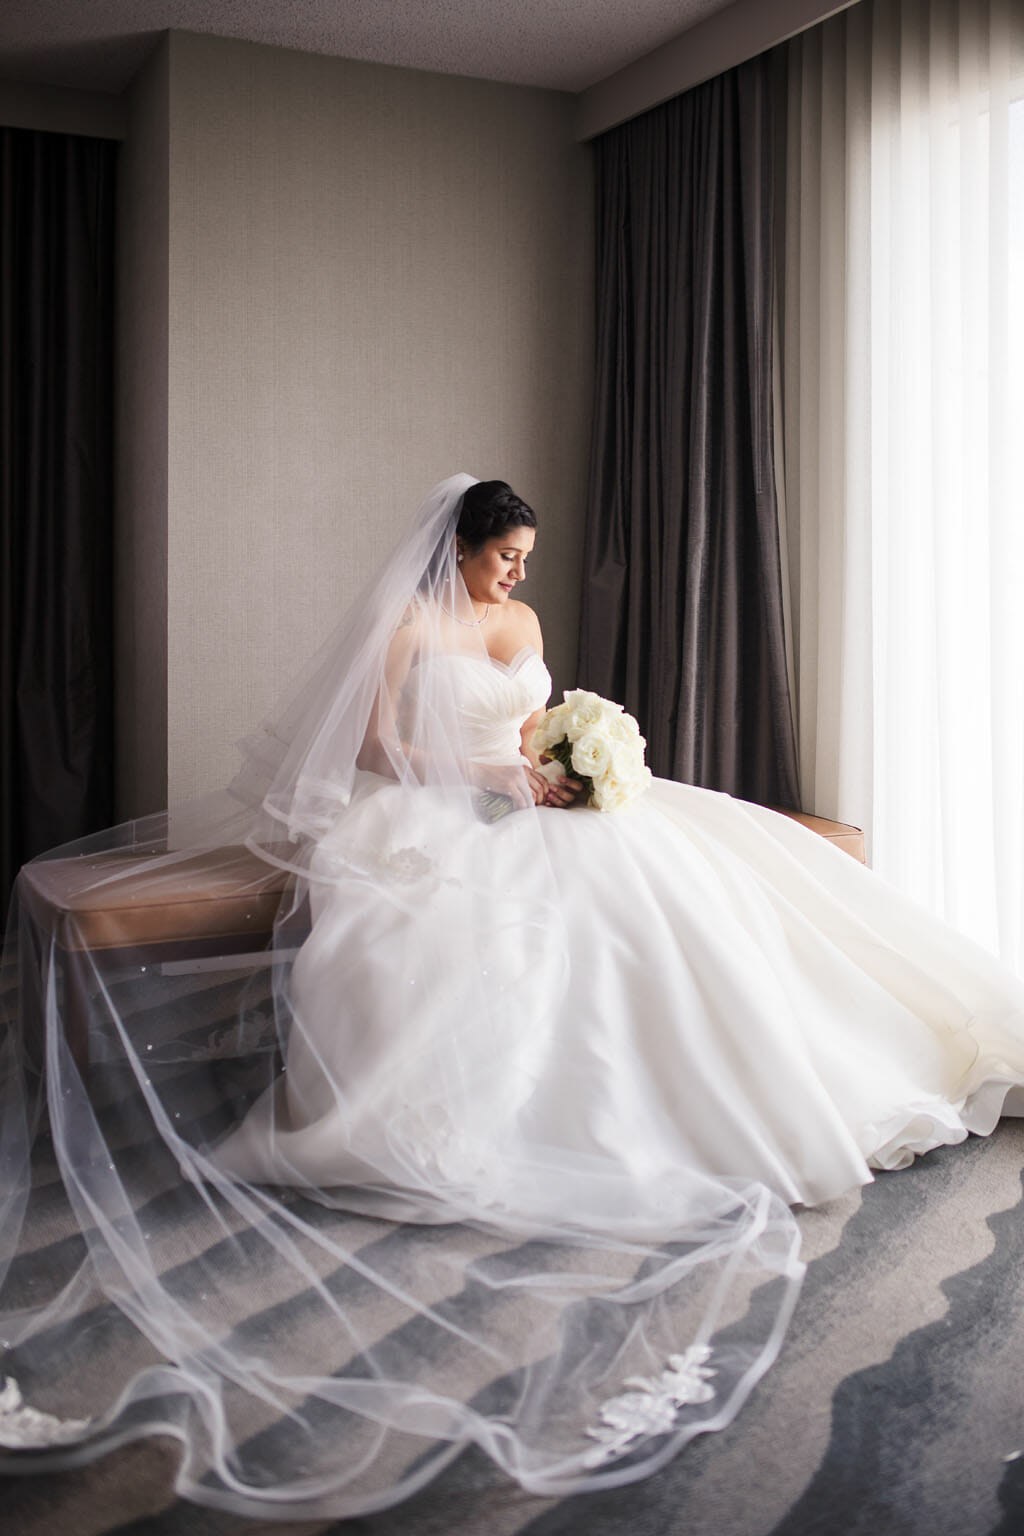 A moment of reflection and a beautiful portrait of our bride by Lin & Jirsa